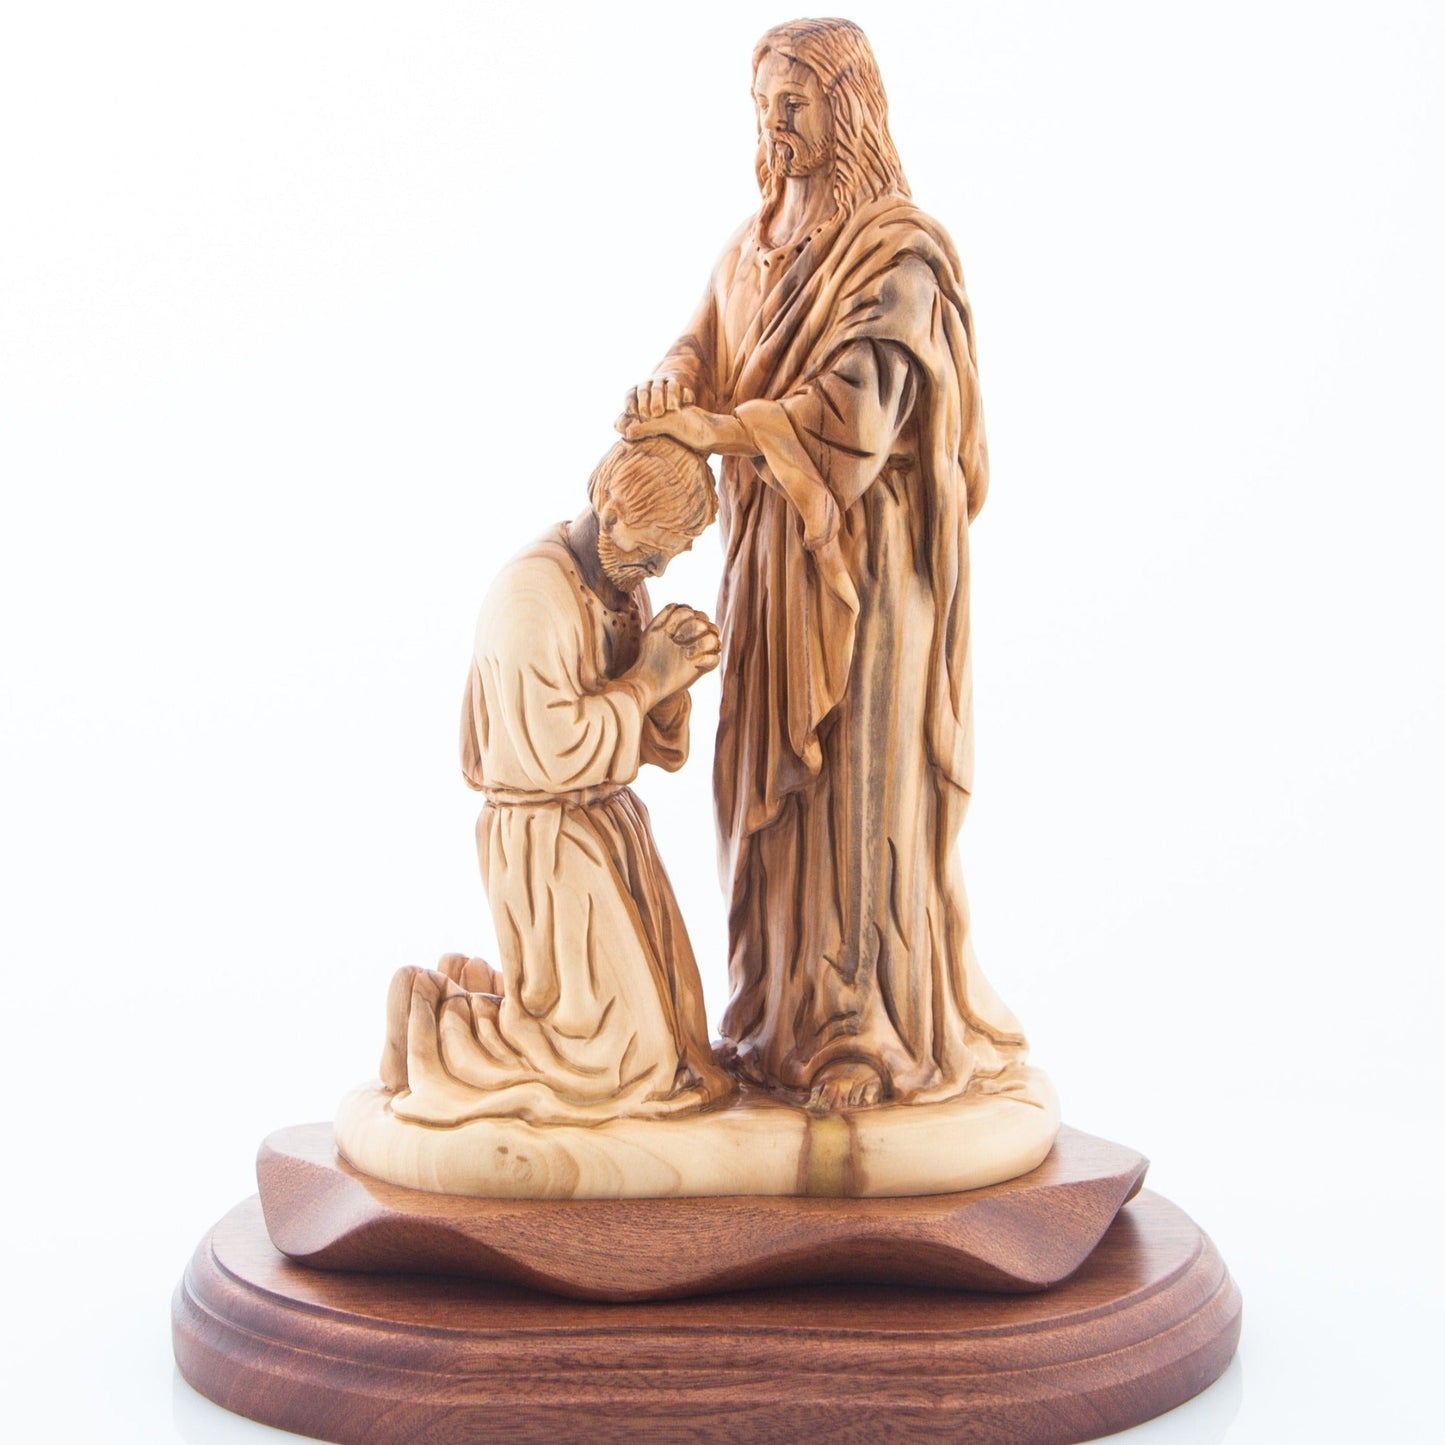 Jesus Christ "Blessing Disciple", 9.4" Wood Carving